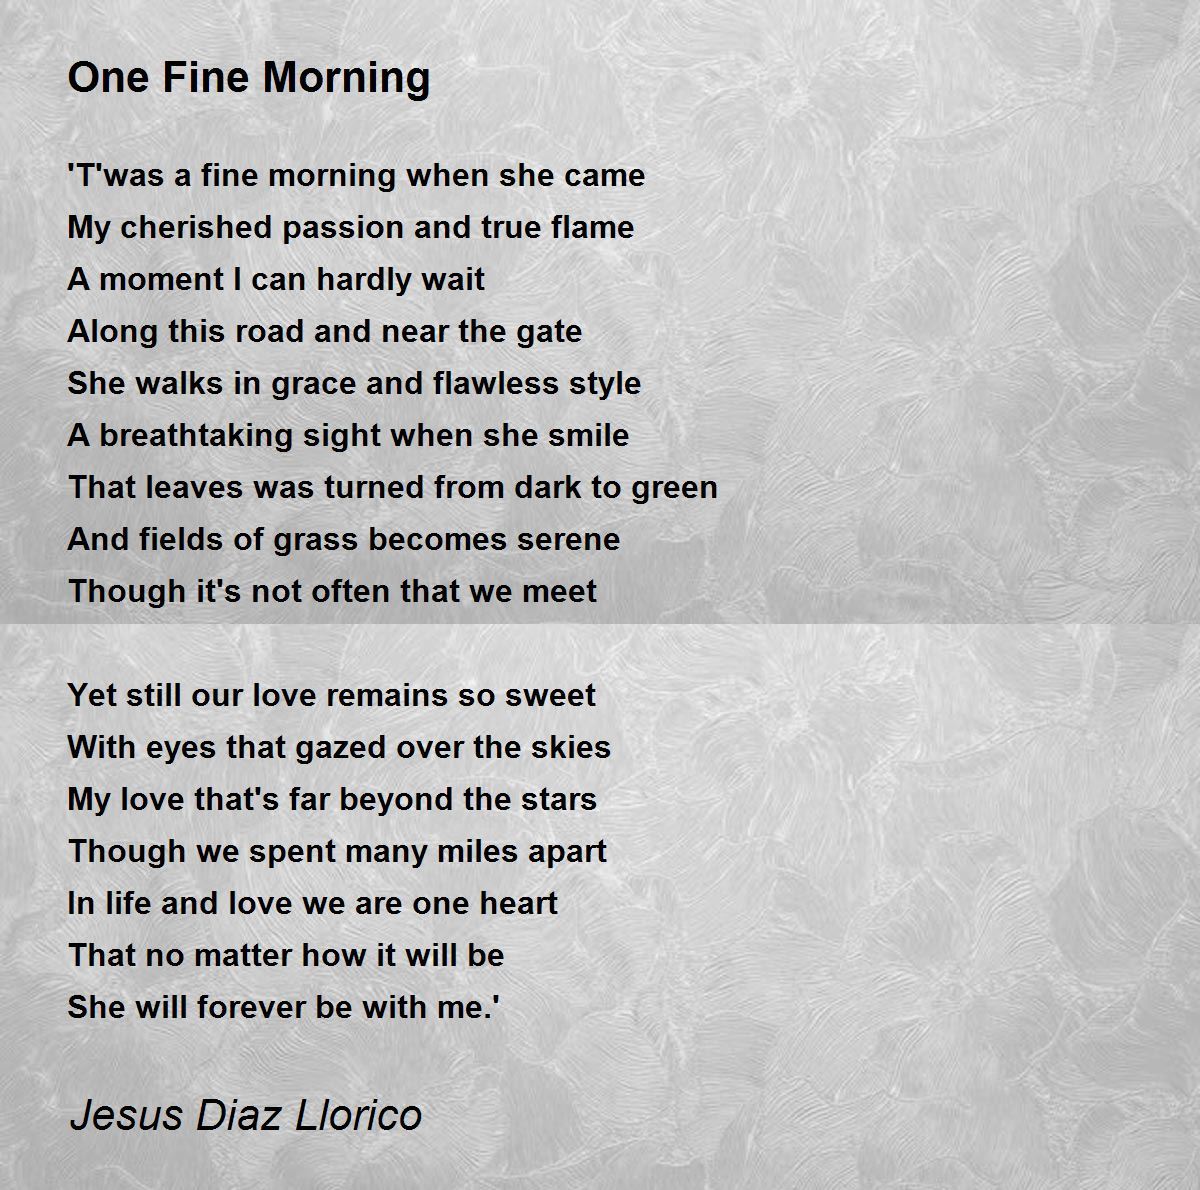 One Fine Morning - One Fine Morning Poem by Jesus Diaz Llorico